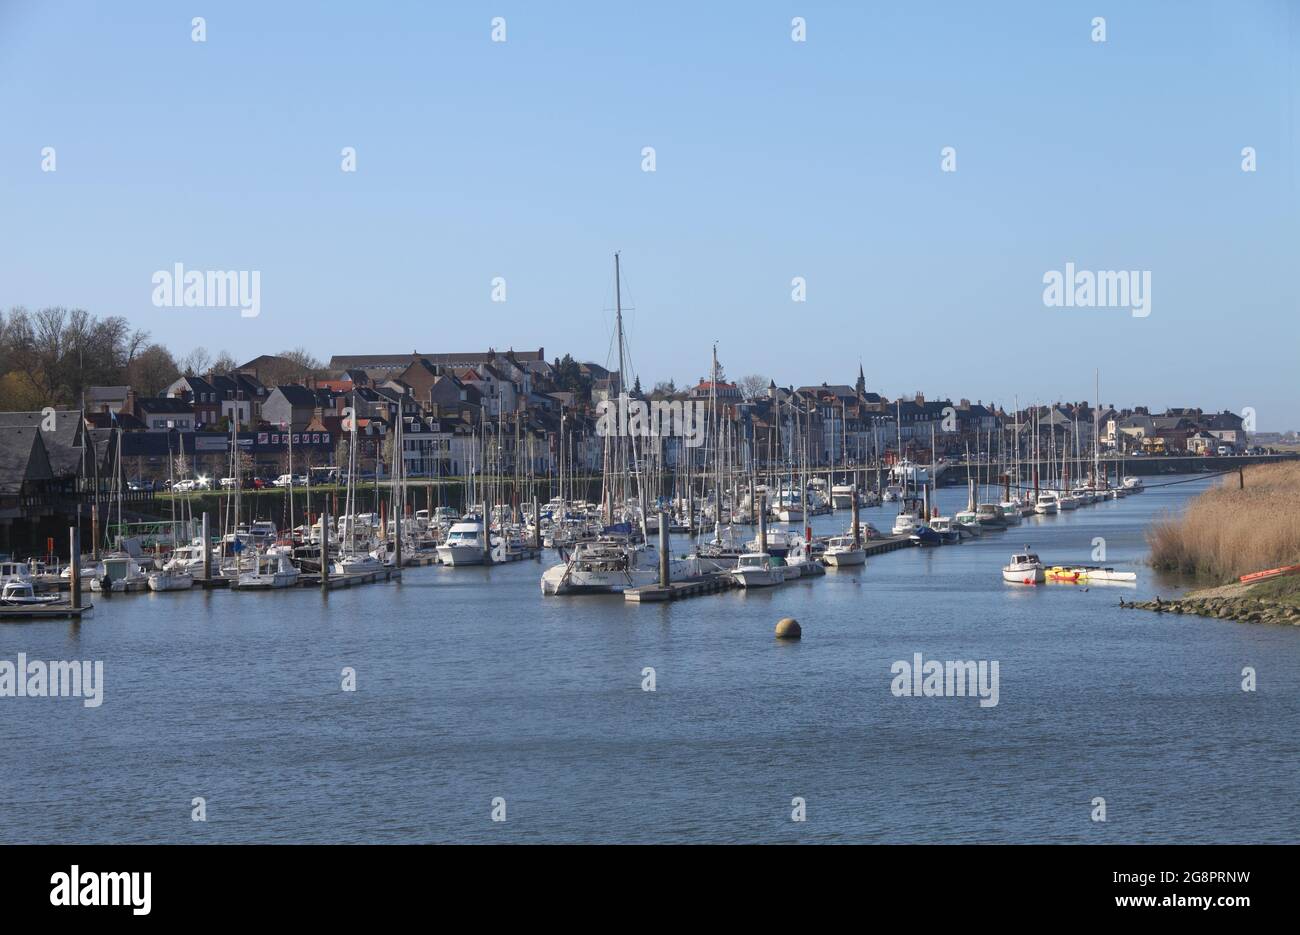 St Valery-sur-Somme, on the edge of the salt marshes of the Somme Bay, Grand Site of France, Picardy, France Stock Photo